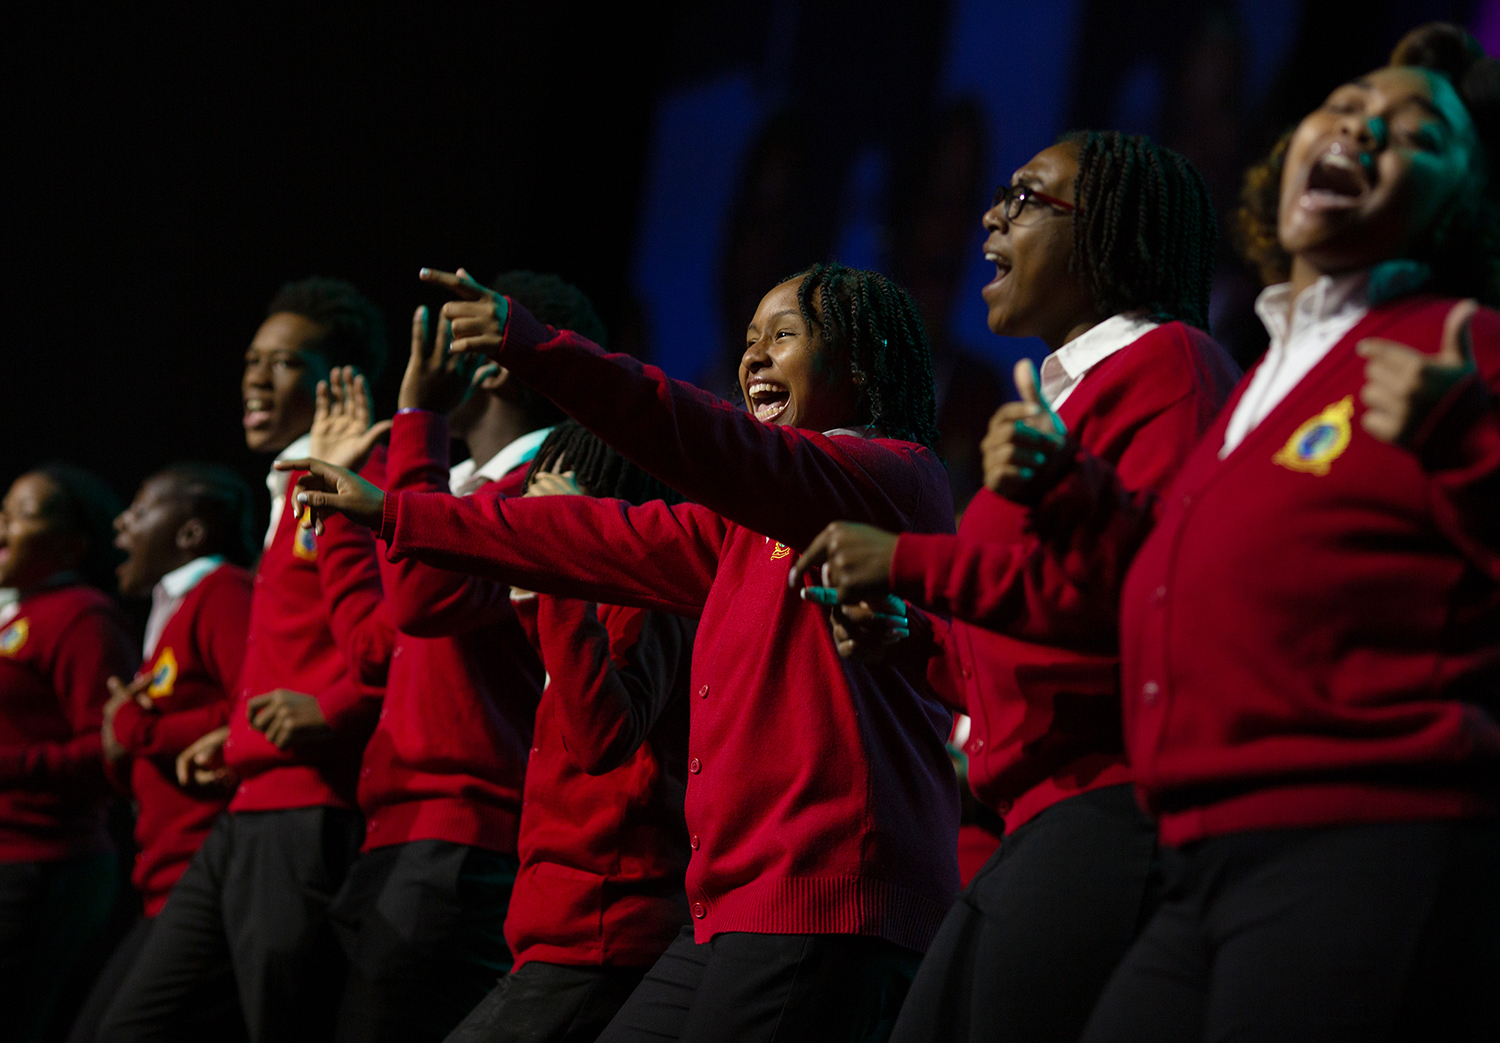 Members of a praise team perform during the Opening Ceremony of the Parliament of the World's Religions in downtown Chicago on August 14, 2023. Photo by Lauren Pond for RNS